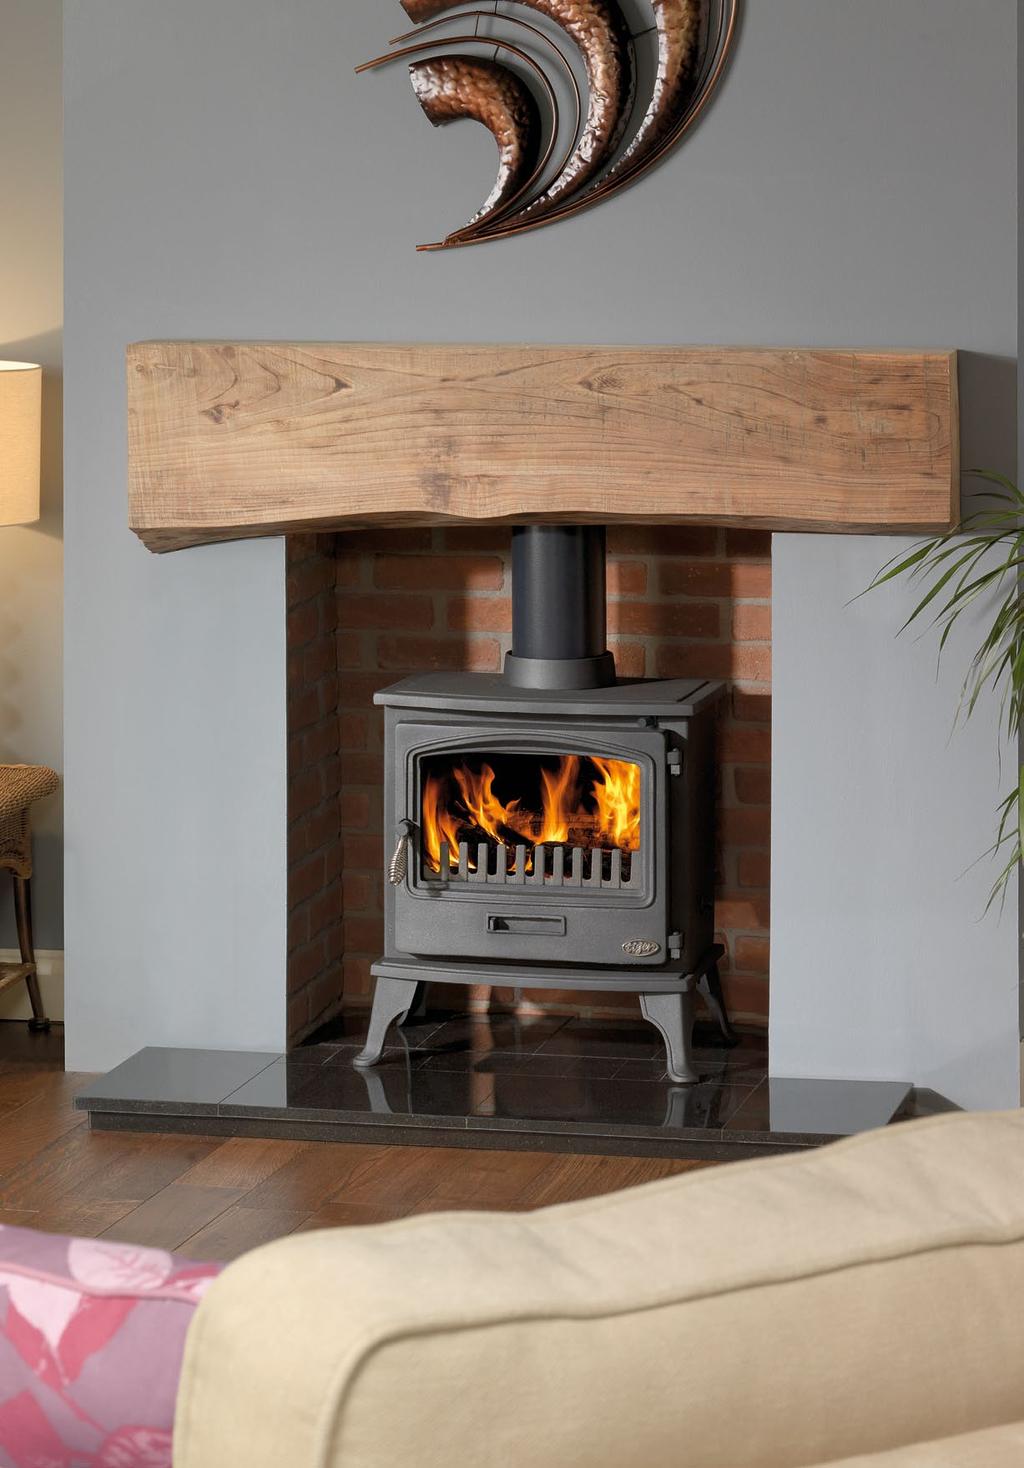 reeded fireboard (slips not used), HEARTH & back hearth: